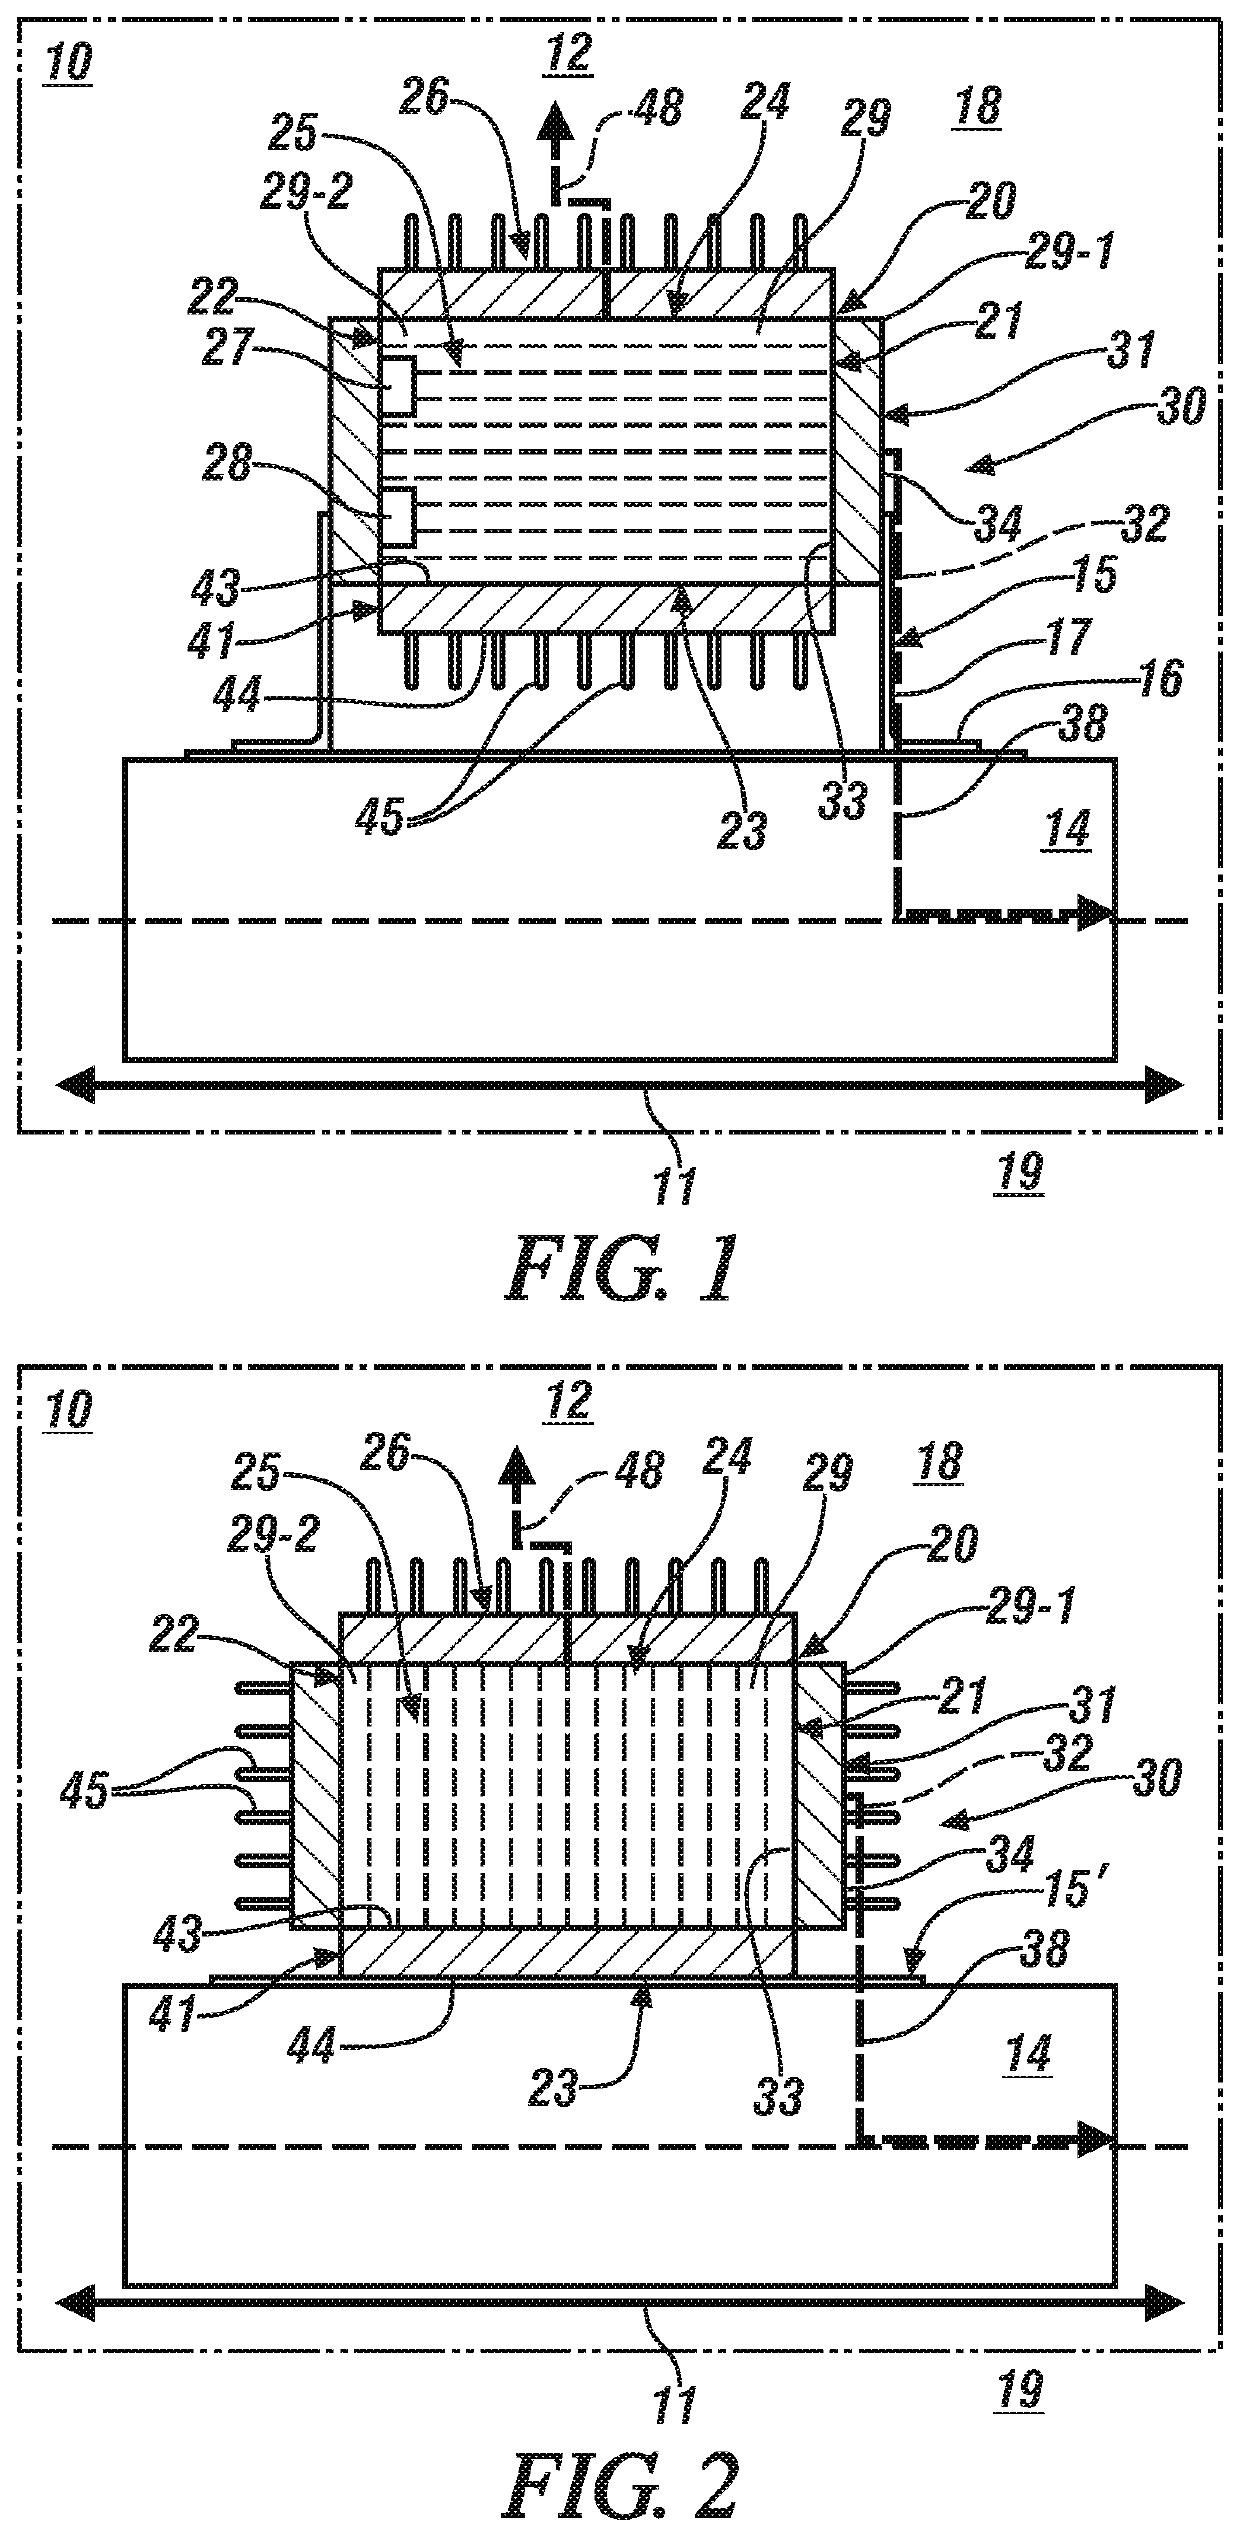 Thermal management system for an on-vehicle battery